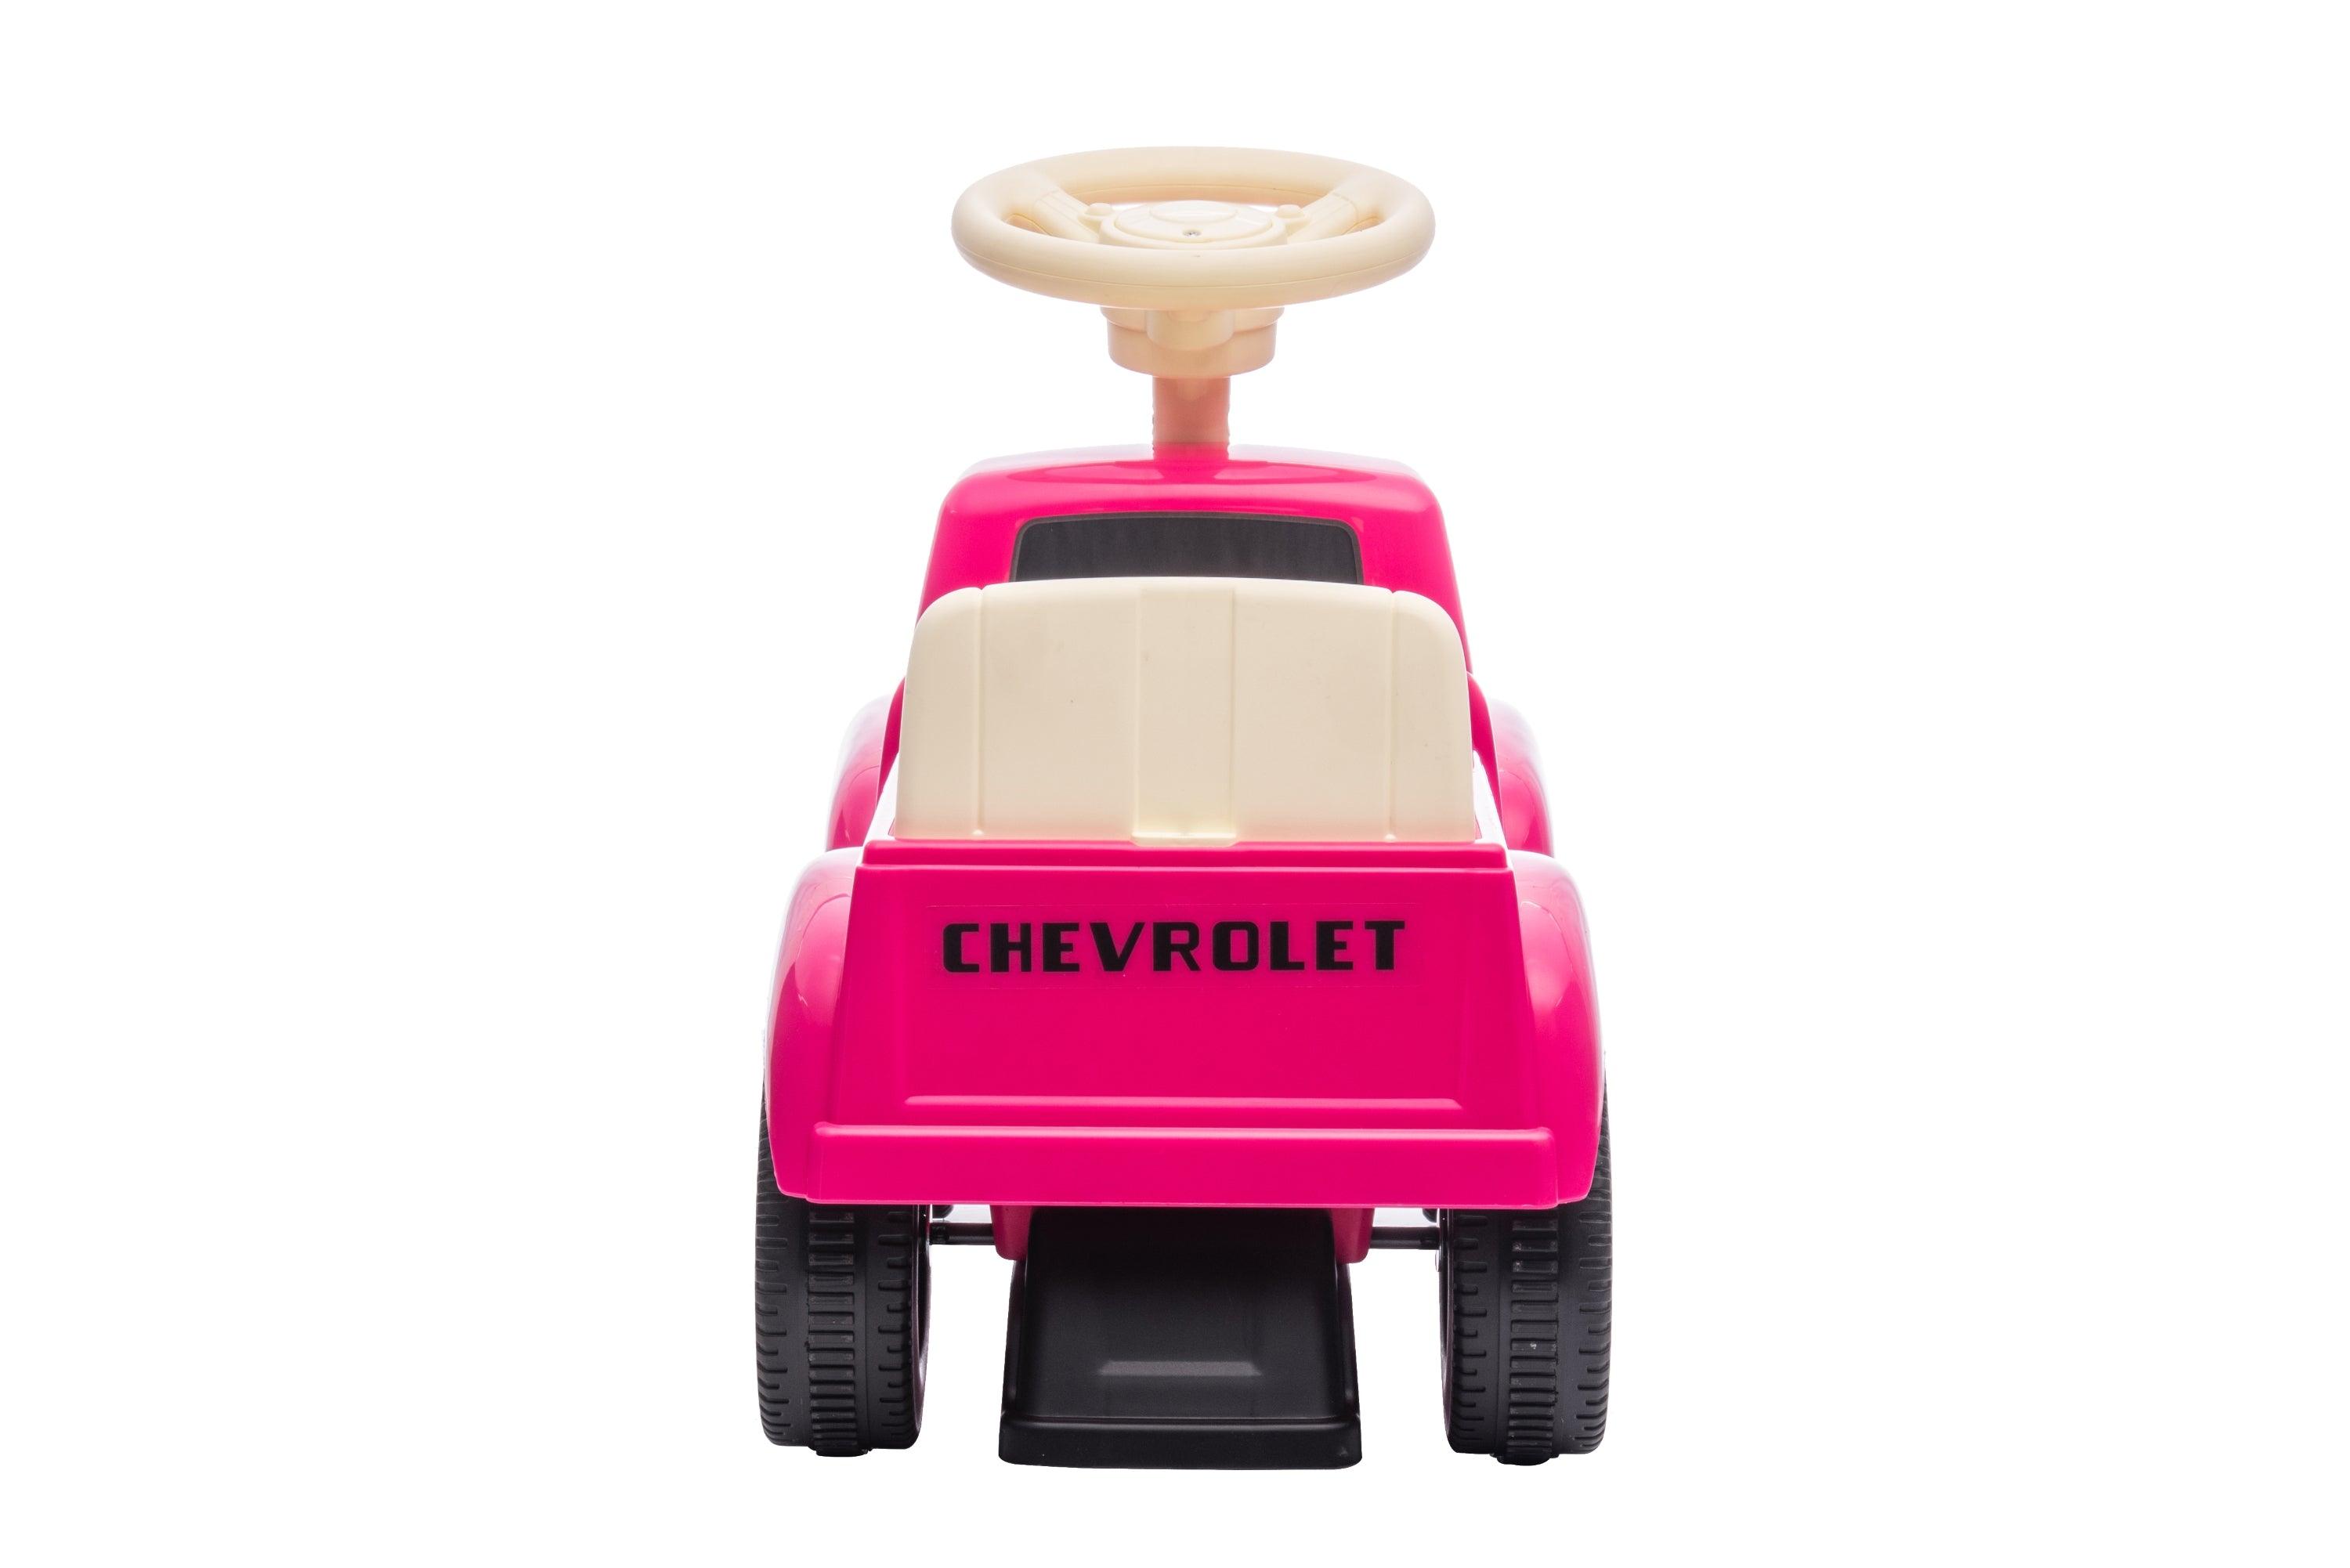 Chevrolet 3100 Vintage Push Car for Toddlers